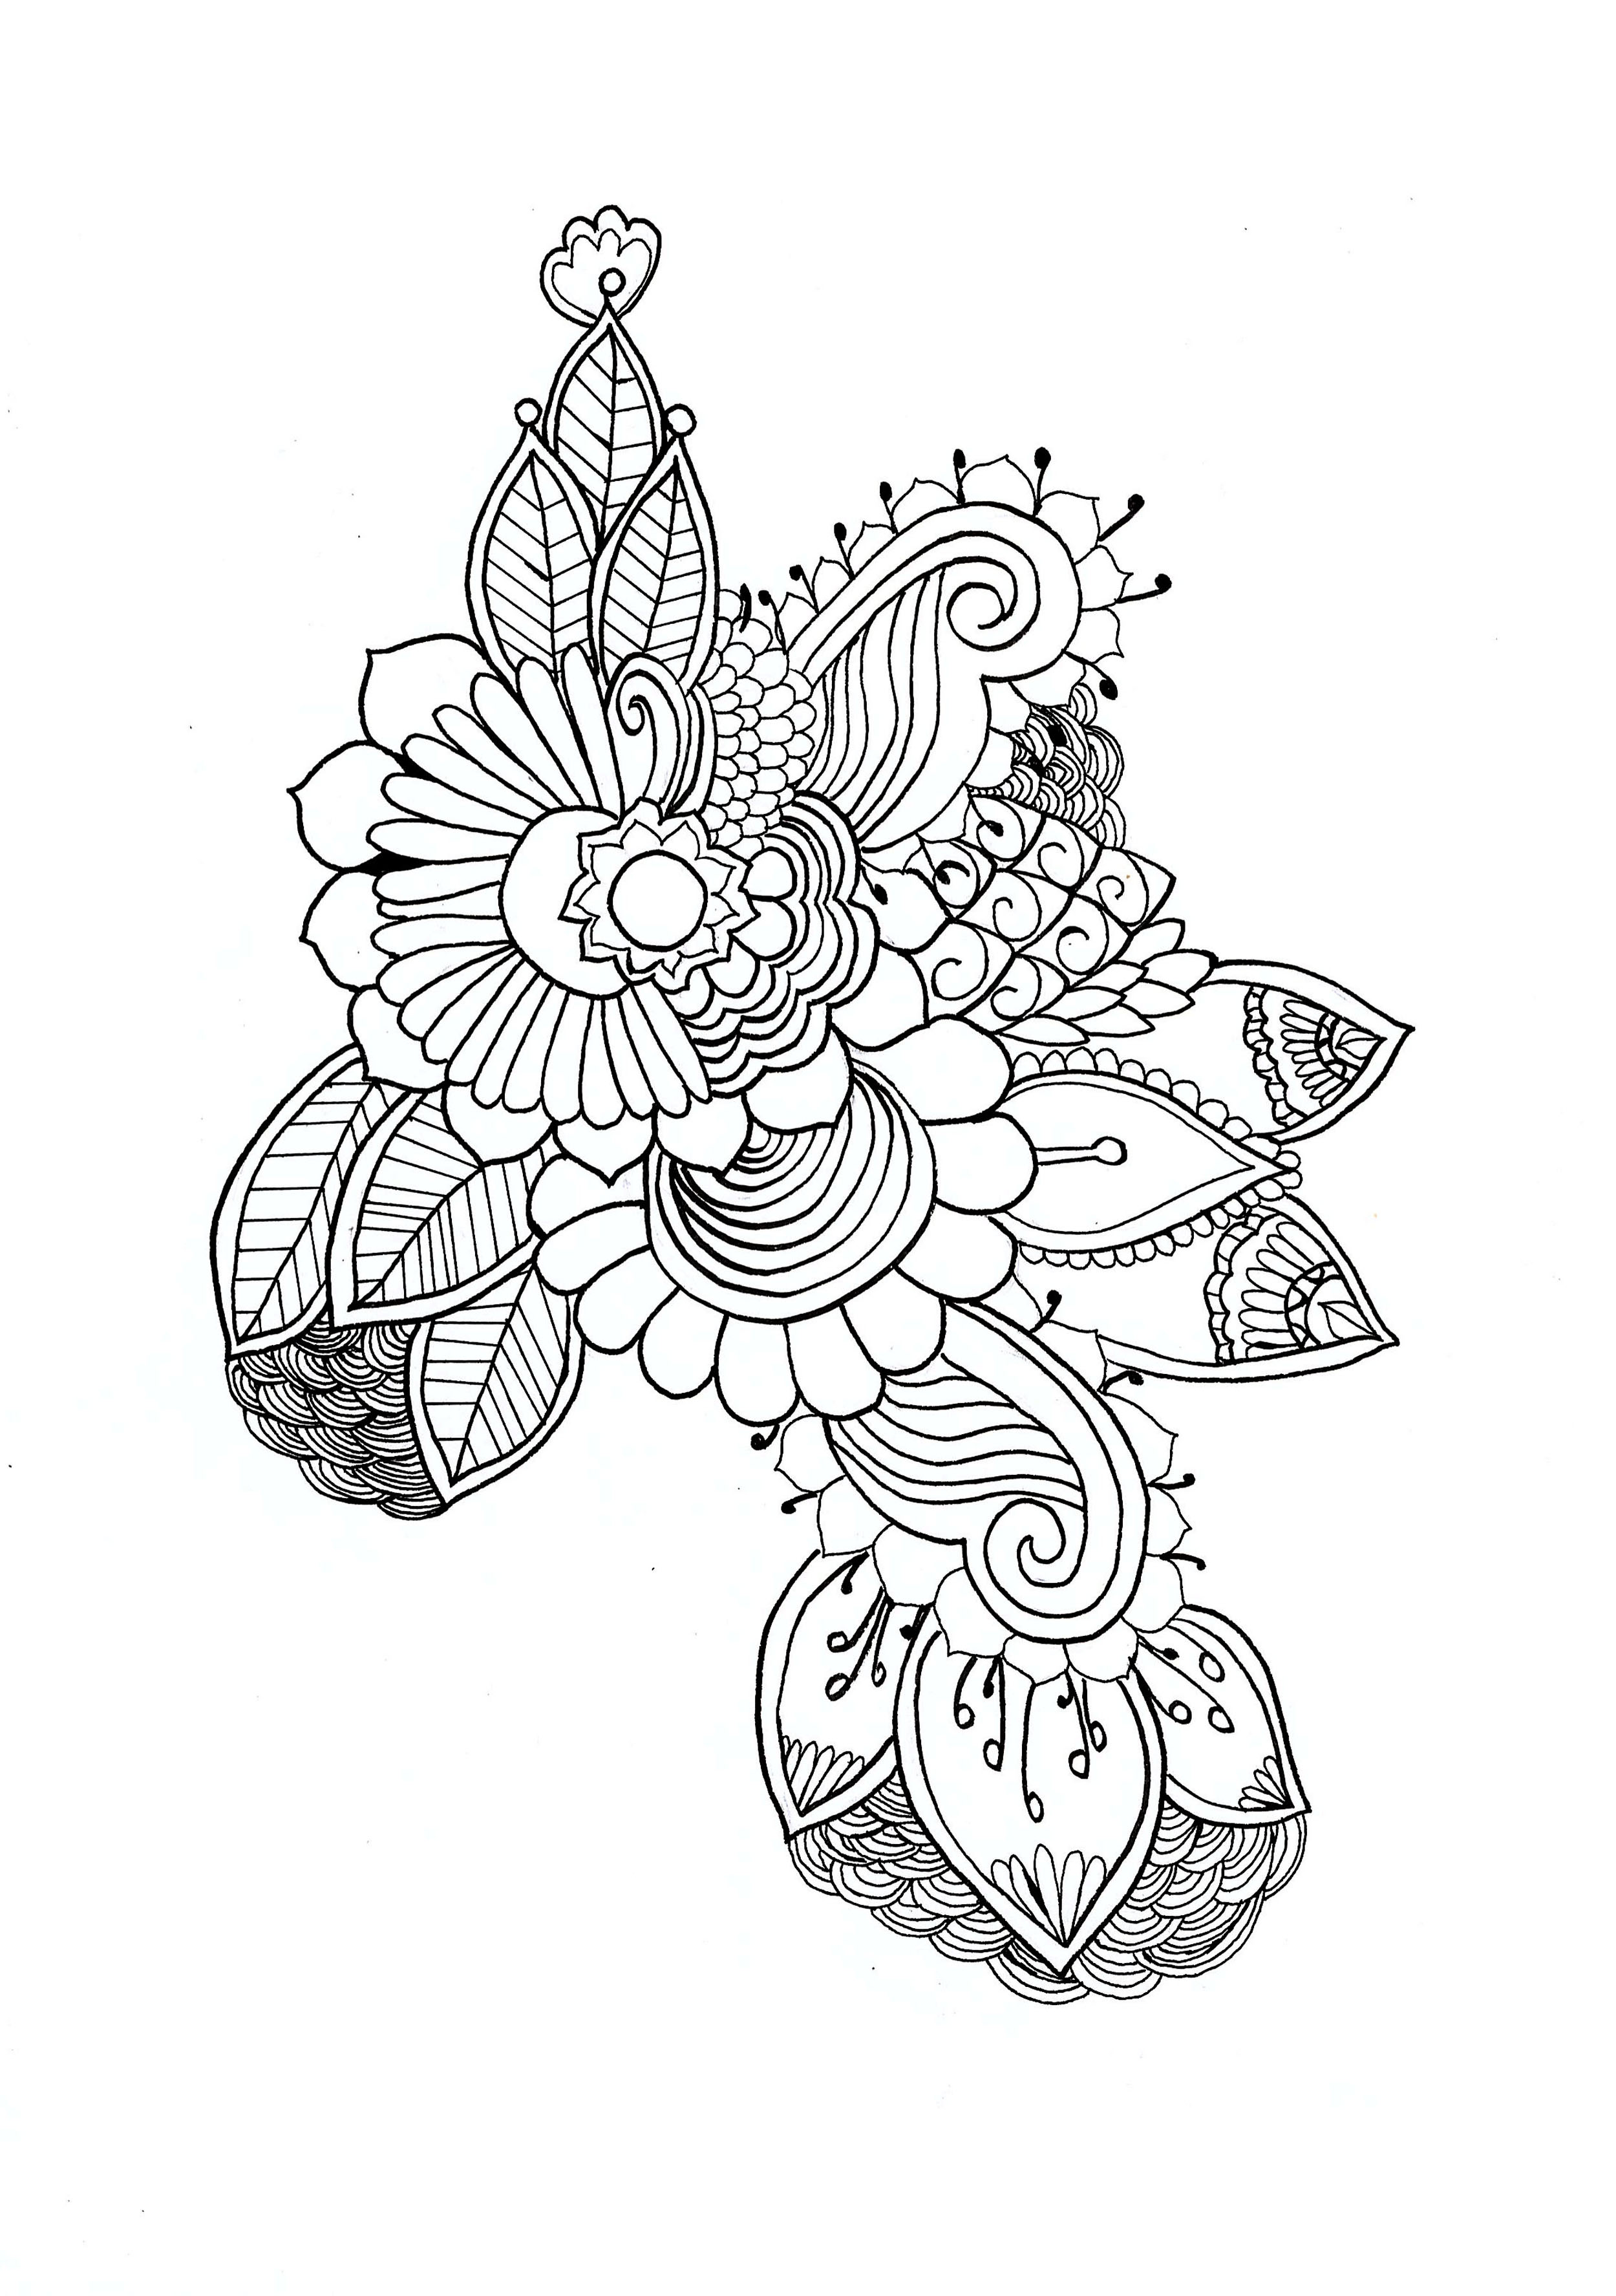 Coloring of a mandala with a particular style